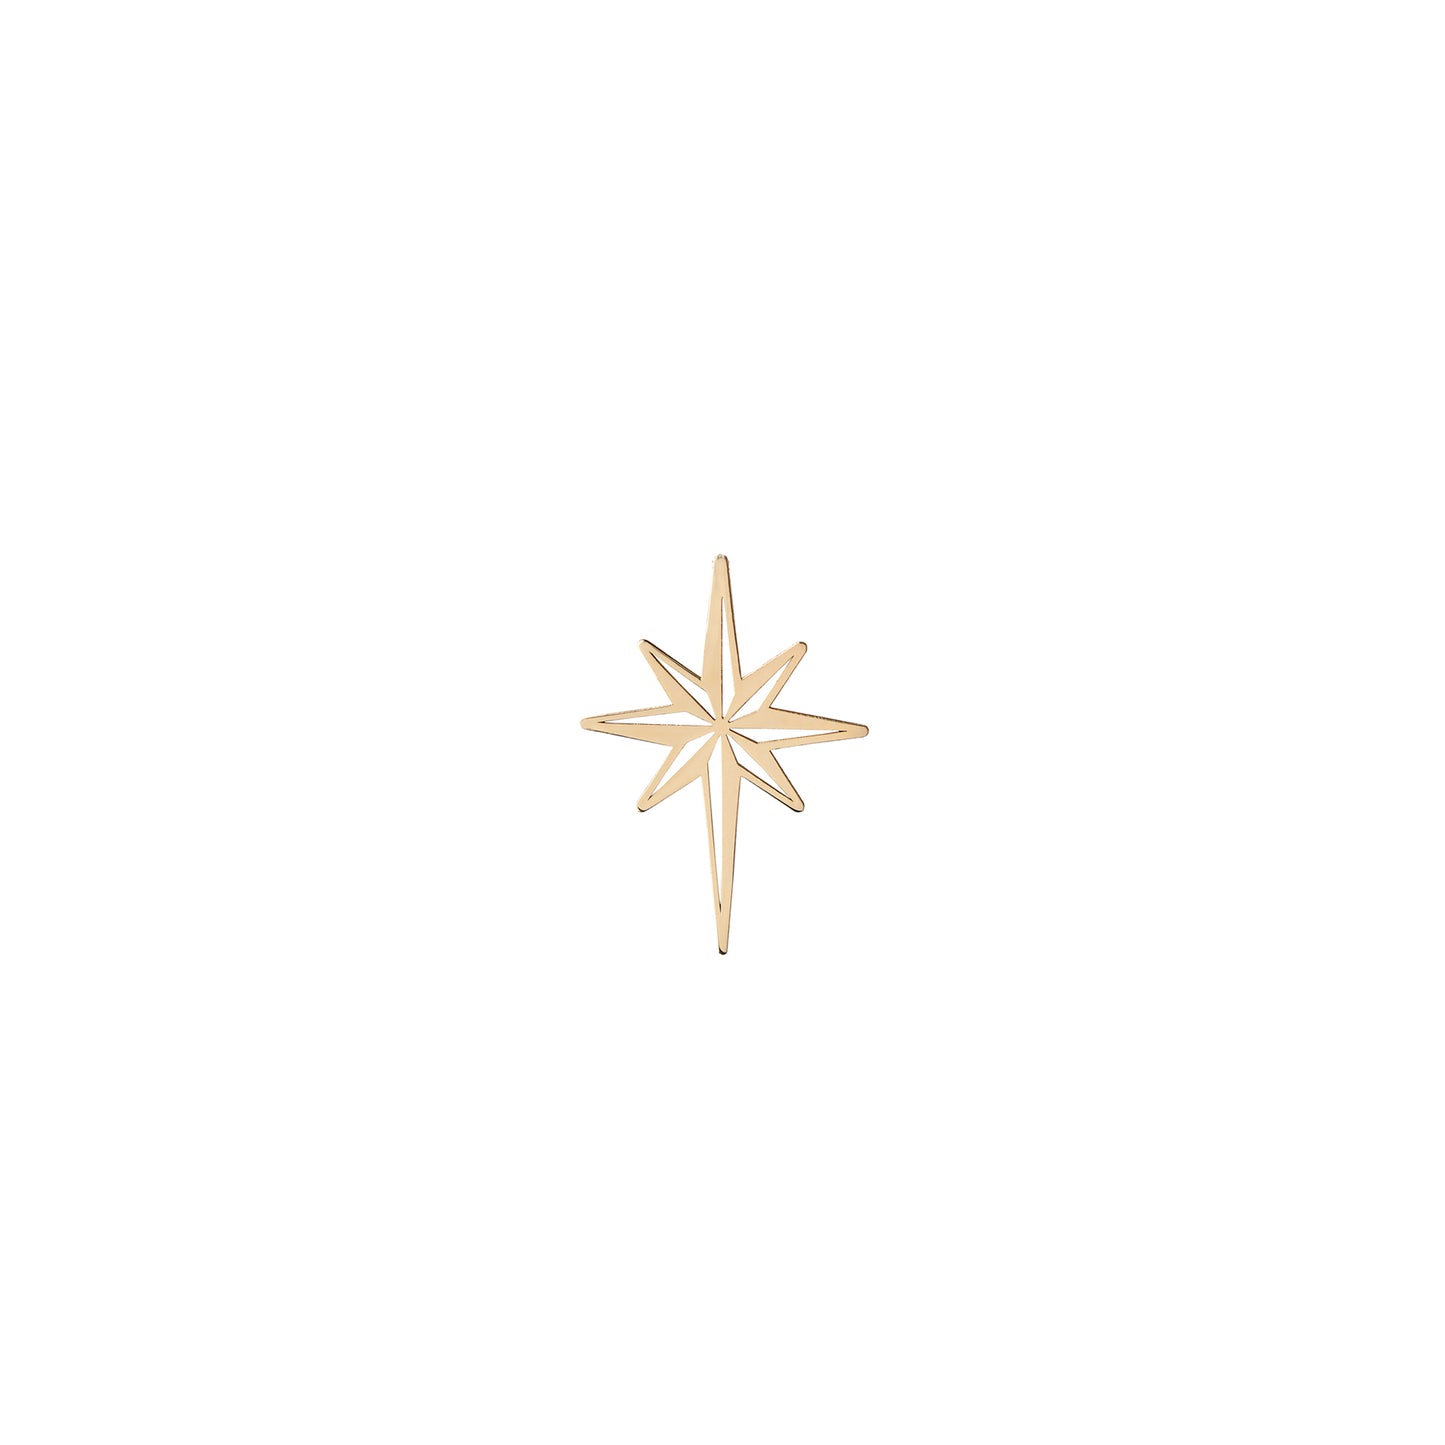 The 8 Pointed Star Necklace